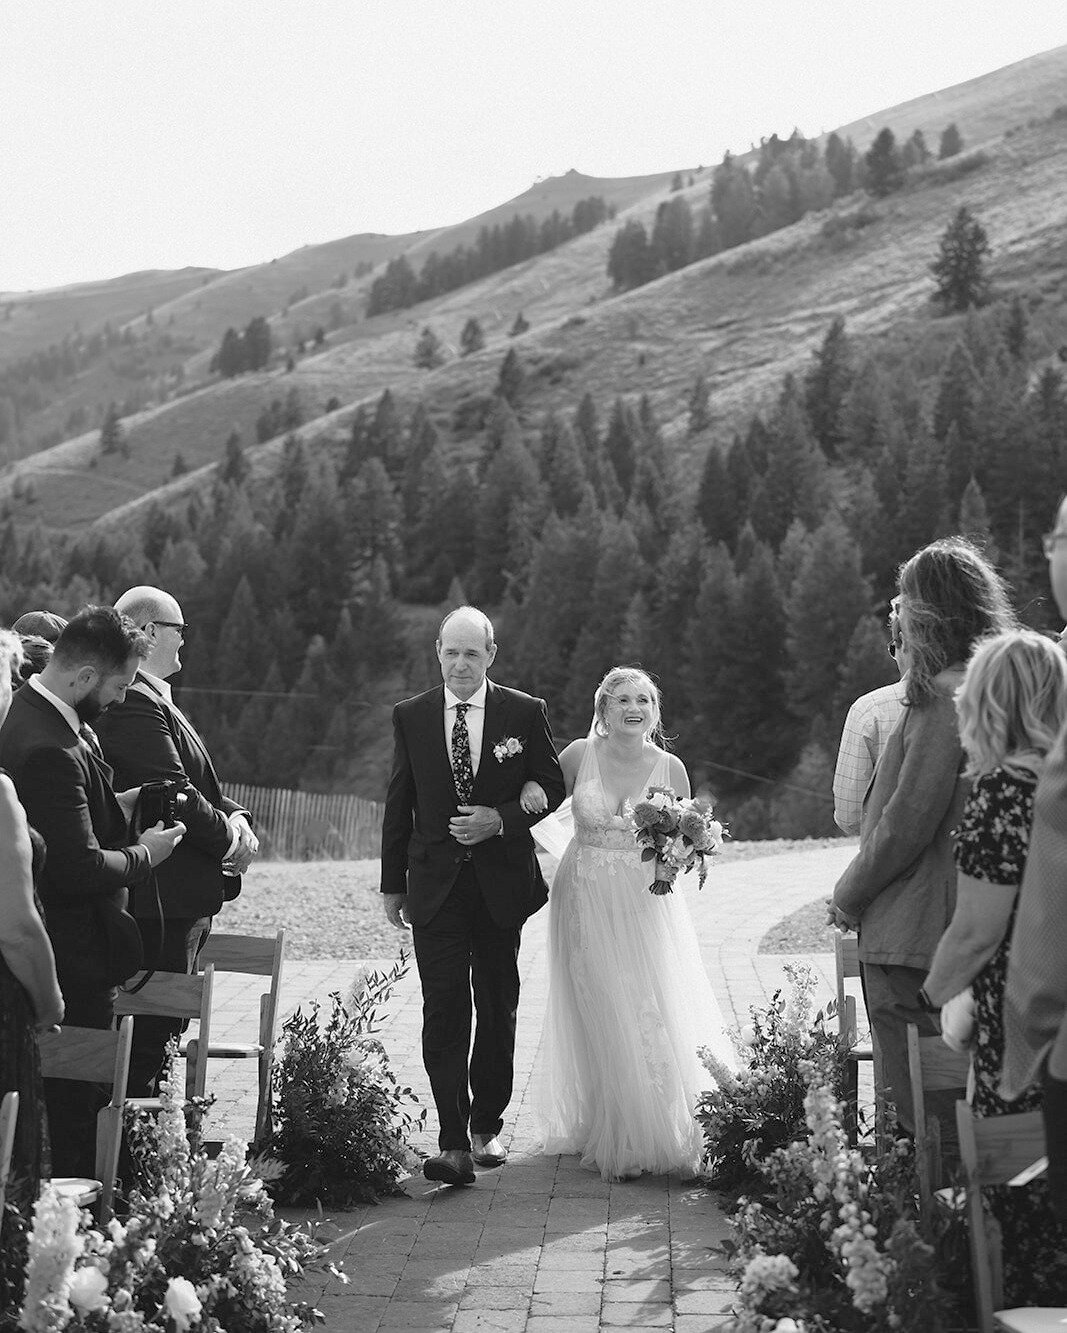 We will never stop sharing this day with the most impeccable team. 
.
.
.
.
.
#sunvalley #sunvalleyidaho #sunvalleyresort #sunvalleywedding #sunvalleyidaho #idahoweddings #idahoweddingplanner #sunvalleyweddingphotographer #sunvalleyweddingphotography